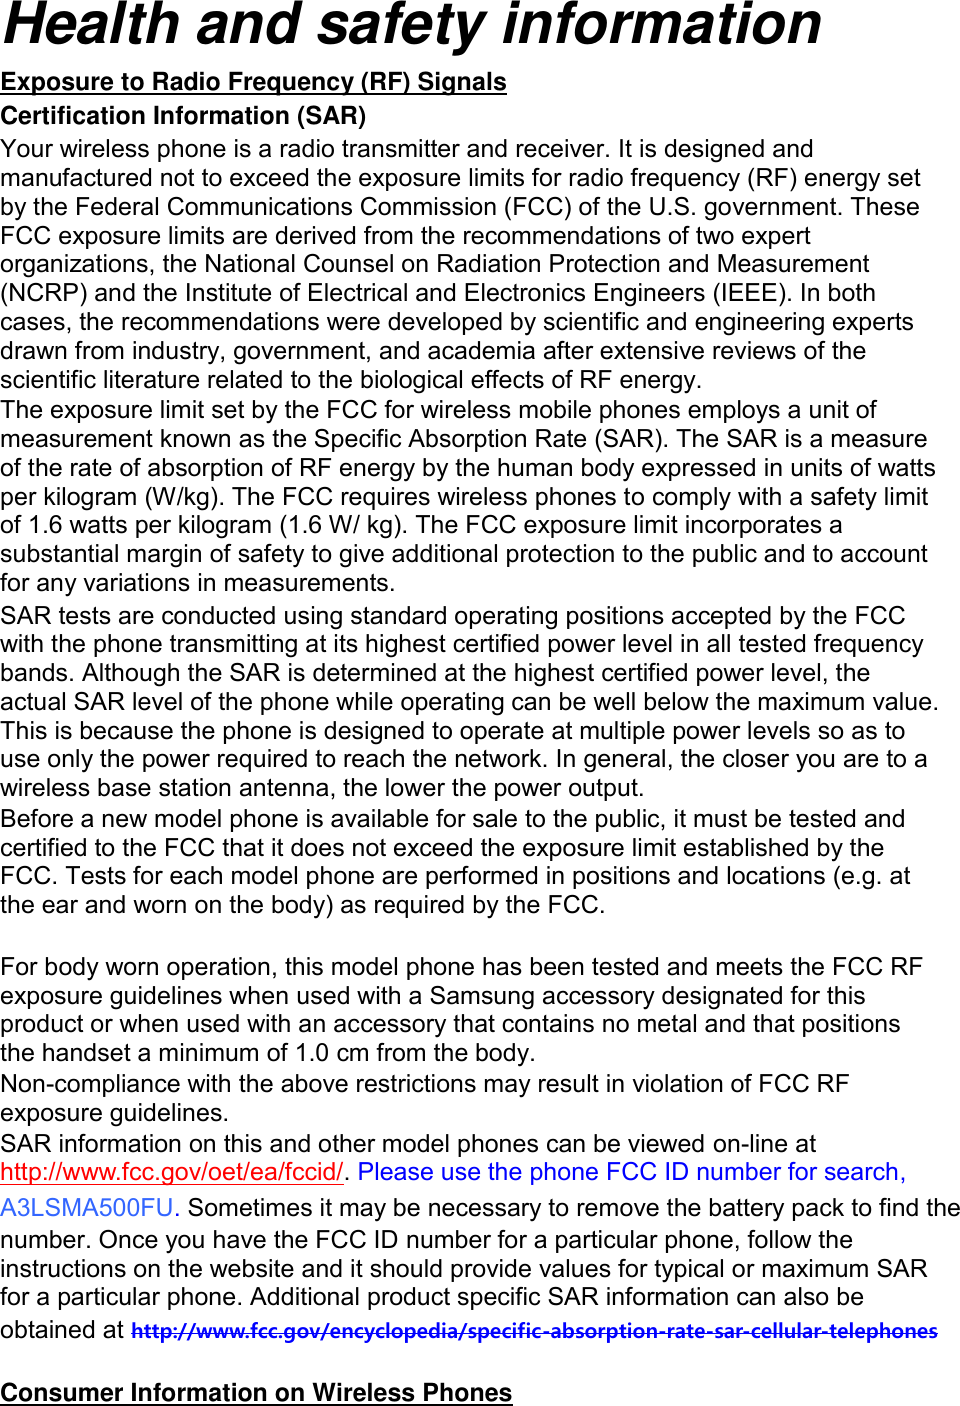 Health and safety information Exposure to Radio Frequency (RF) Signals Certification Information (SAR) Your wireless phone is a radio transmitter and receiver. It is designed and manufactured not to exceed the exposure limits for radio frequency (RF) energy set by the Federal Communications Commission (FCC) of the U.S. government. These FCC exposure limits are derived from the recommendations of two expert organizations, the National Counsel on Radiation Protection and Measurement (NCRP) and the Institute of Electrical and Electronics Engineers (IEEE). In both cases, the recommendations were developed by scientific and engineering experts drawn from industry, government, and academia after extensive reviews of the scientific literature related to the biological effects of RF energy. The exposure limit set by the FCC for wireless mobile phones employs a unit of measurement known as the Specific Absorption Rate (SAR). The SAR is a measure of the rate of absorption of RF energy by the human body expressed in units of watts per kilogram (W/kg). The FCC requires wireless phones to comply with a safety limit of 1.6 watts per kilogram (1.6 W/ kg). The FCC exposure limit incorporates a substantial margin of safety to give additional protection to the public and to account for any variations in measurements. SAR tests are conducted using standard operating positions accepted by the FCC with the phone transmitting at its highest certified power level in all tested frequency bands. Although the SAR is determined at the highest certified power level, the actual SAR level of the phone while operating can be well below the maximum value. This is because the phone is designed to operate at multiple power levels so as to use only the power required to reach the network. In general, the closer you are to a wireless base station antenna, the lower the power output. Before a new model phone is available for sale to the public, it must be tested and certified to the FCC that it does not exceed the exposure limit established by the FCC. Tests for each model phone are performed in positions and locations (e.g. at the ear and worn on the body) as required by the FCC.      For body worn operation, this model phone has been tested and meets the FCC RF exposure guidelines when used with a Samsung accessory designated for this product or when used with an accessory that contains no metal and that positions the handset a minimum of 1.0 cm from the body.   Non-compliance with the above restrictions may result in violation of FCC RF exposure guidelines. SAR information on this and other model phones can be viewed on-line at http://www.fcc.gov/oet/ea/fccid/. Please use the phone FCC ID number for search, A3LSMA500FU. Sometimes it may be necessary to remove the battery pack to find the number. Once you have the FCC ID number for a particular phone, follow the instructions on the website and it should provide values for typical or maximum SAR for a particular phone. Additional product specific SAR information can also be obtained at http://www.fcc.gov/encyclopedia/specific-absorption-rate-sar-cellular-telephones  Consumer Information on Wireless Phones 